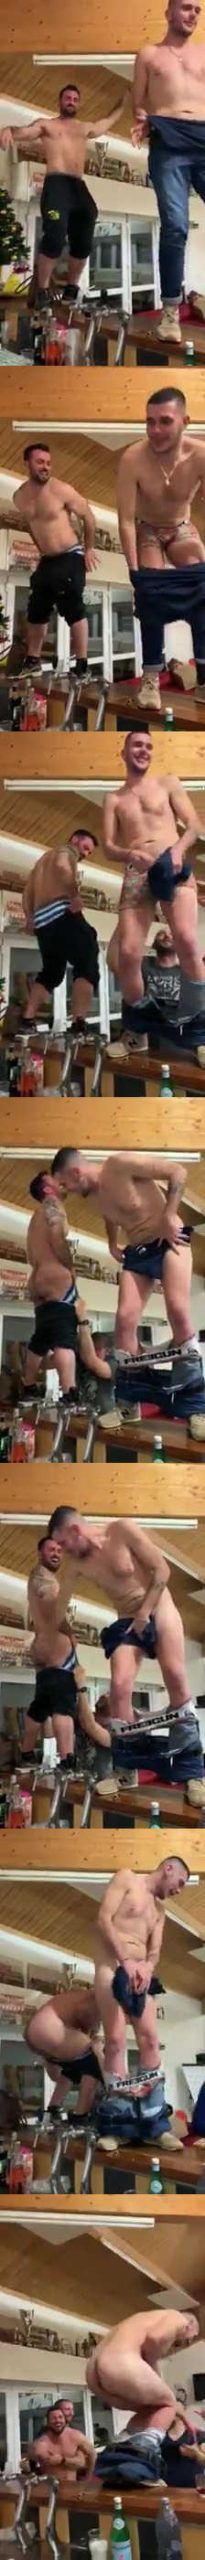 two rugby guys pantsed by mate in clubhouse